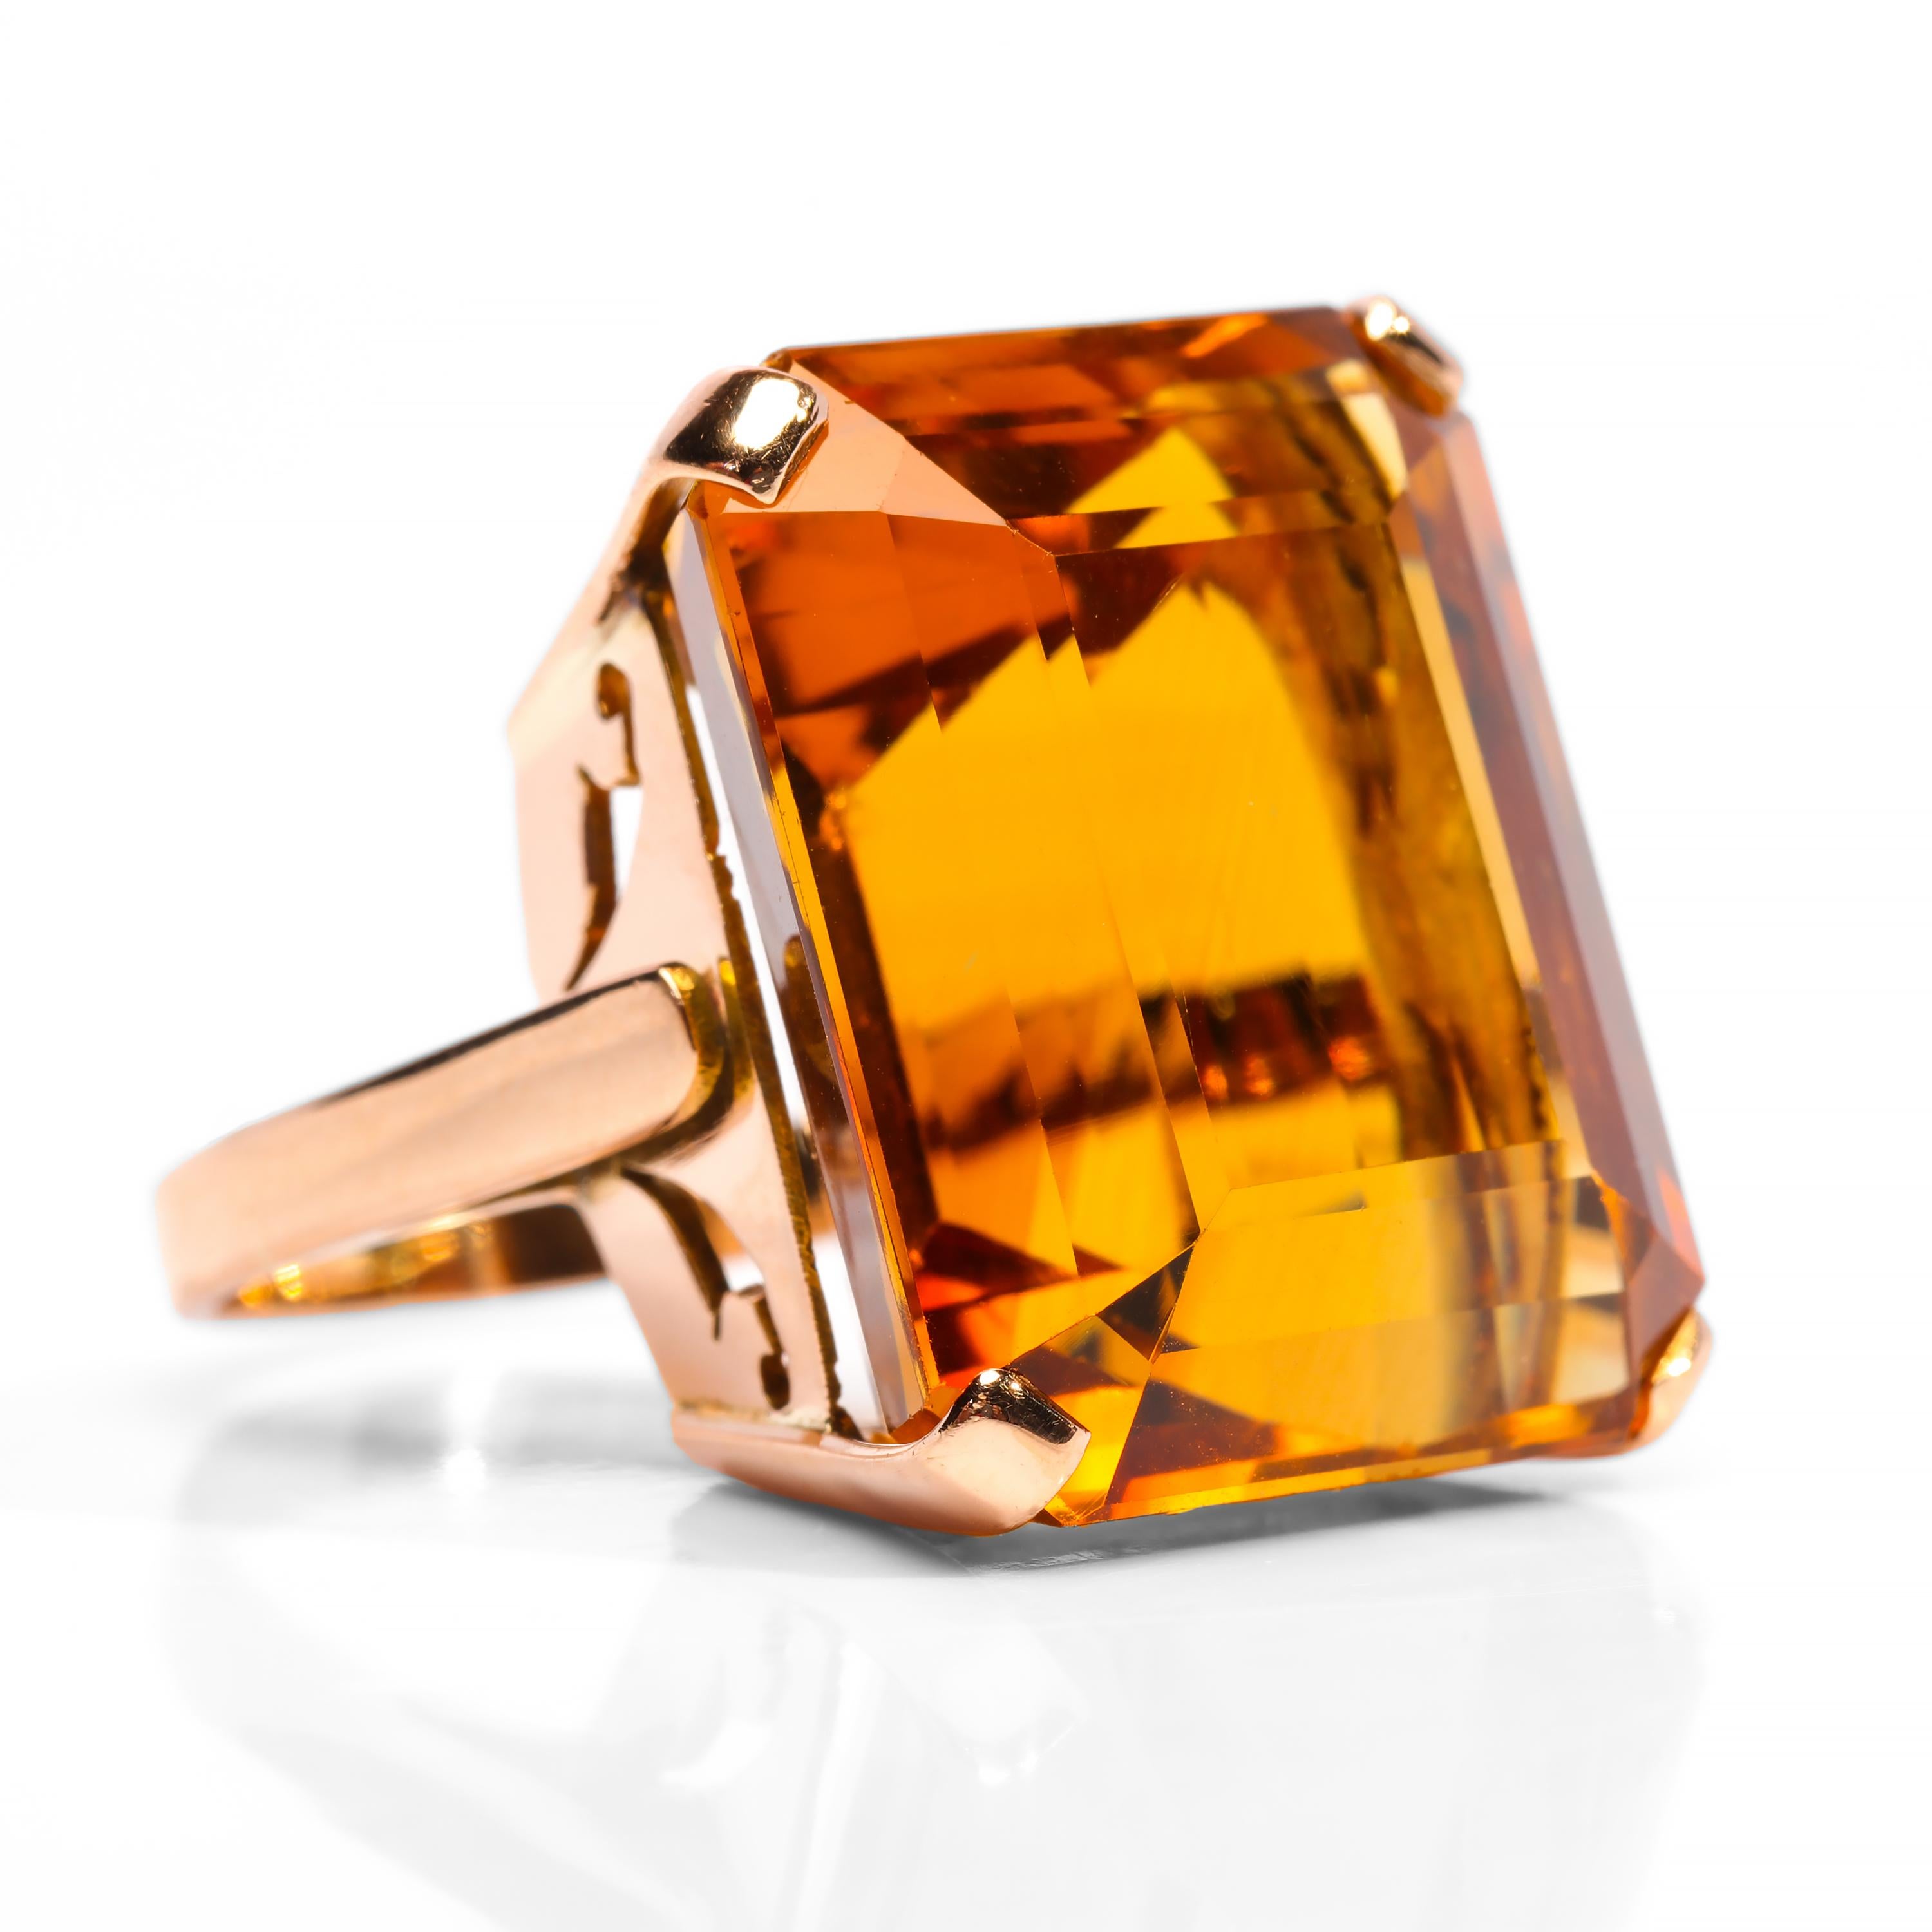 A 33.44-carat emerald-cut Madeira citrine with depth, fire, smoldering intensity, and just plain old-school 